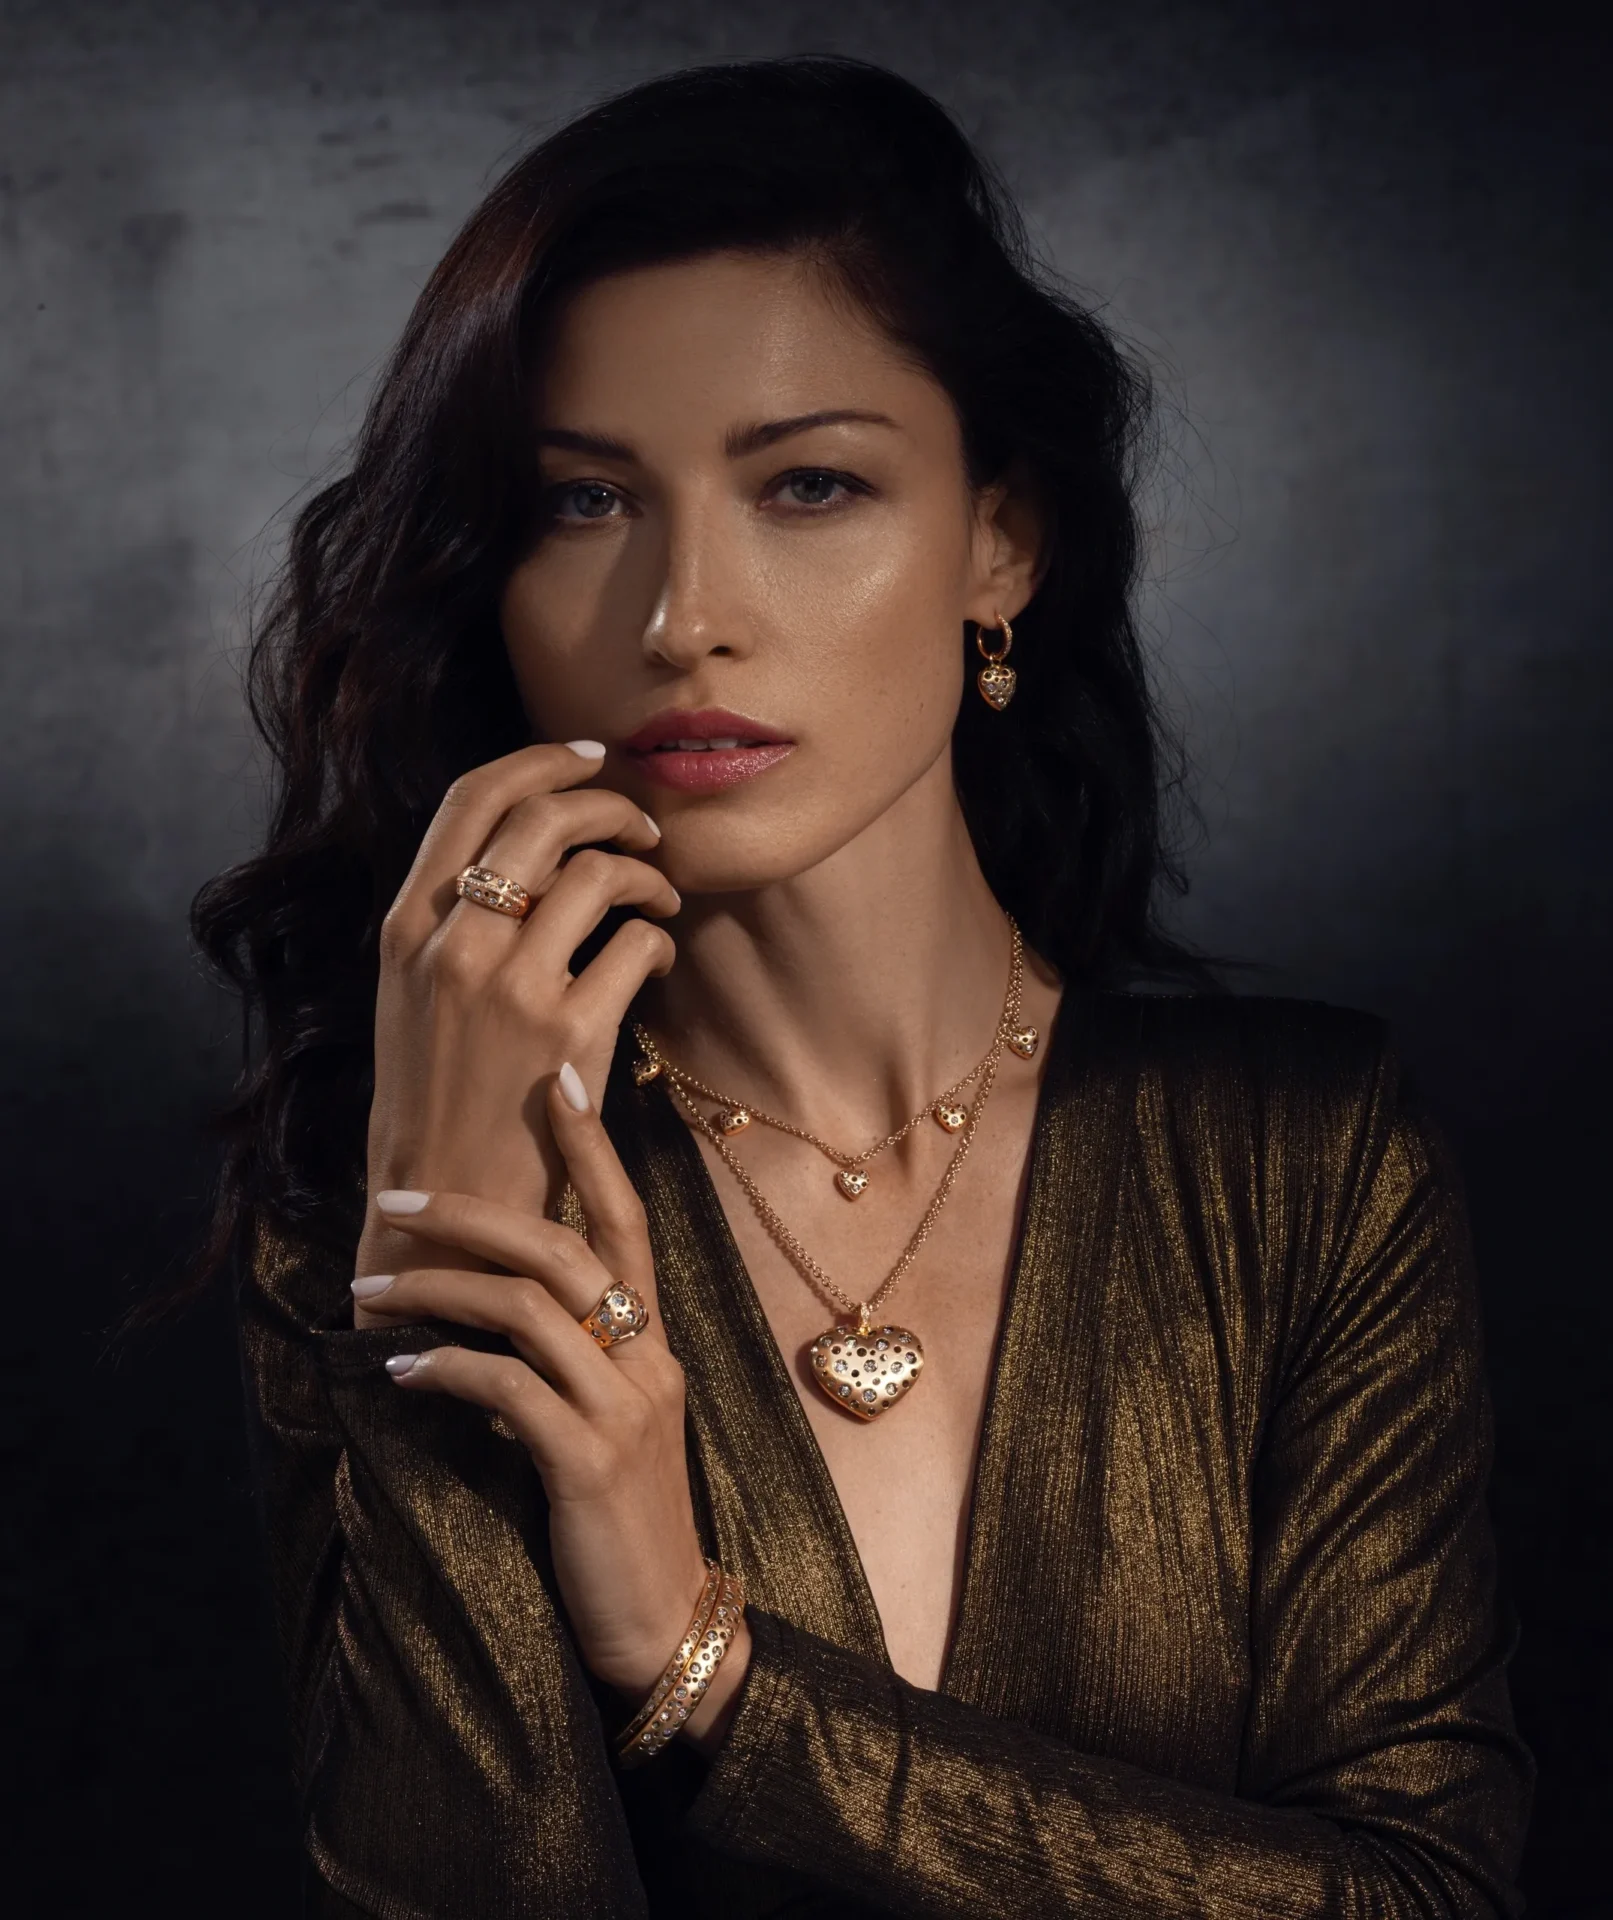 A woman with long hair and wearing gold jewelry.